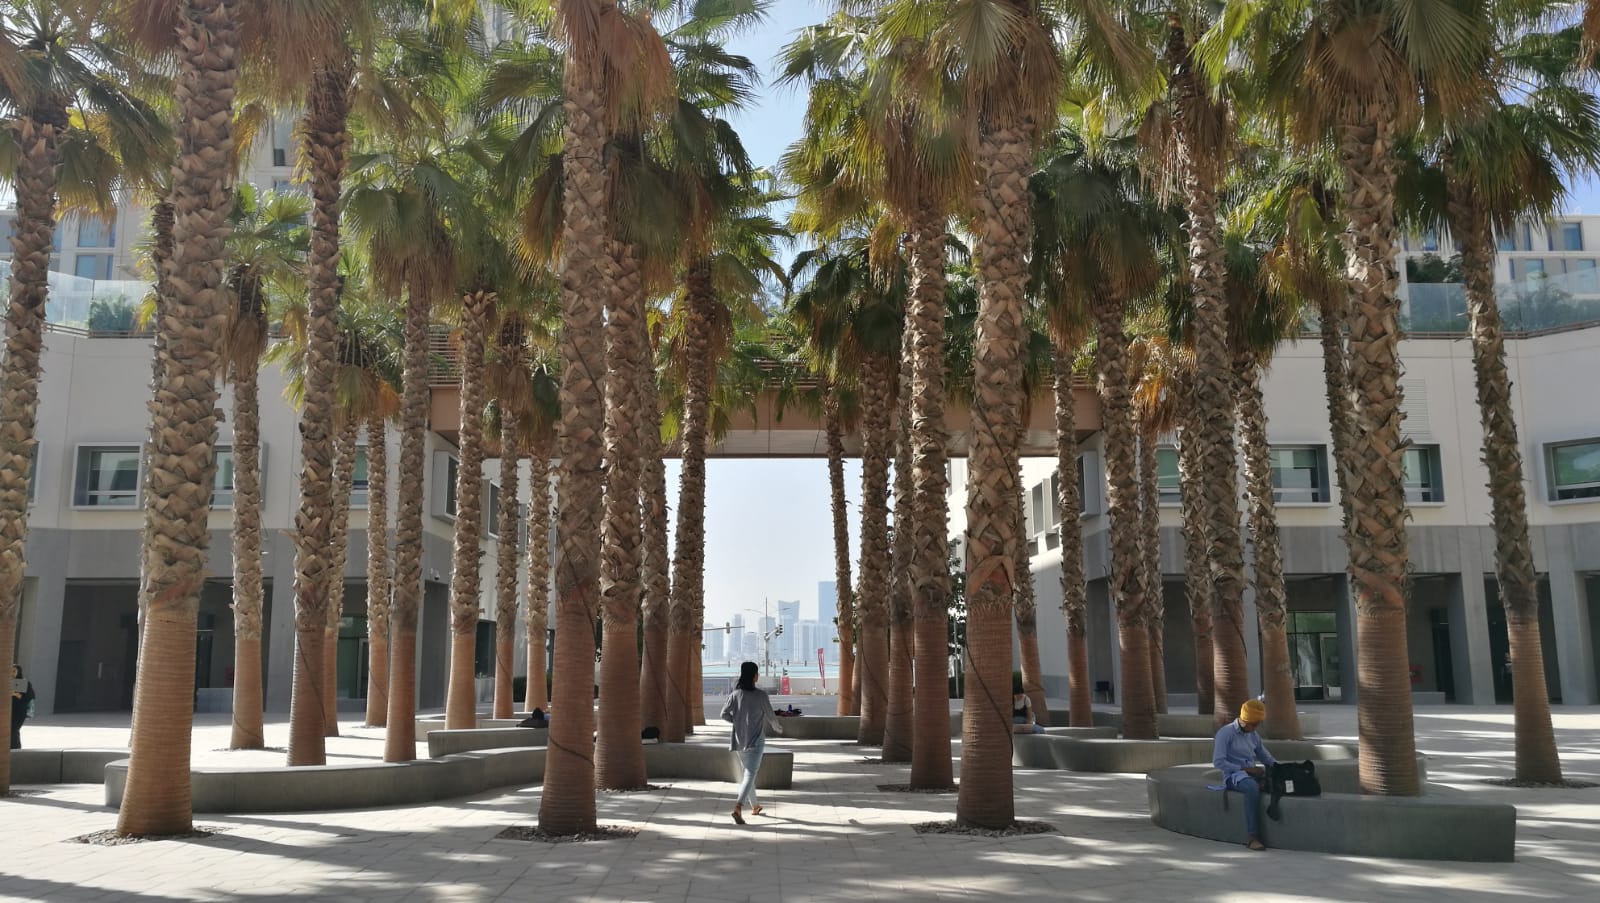 Palm trees in the center for the NYU Abu Dhabi campus. One person is walking through them, and another sits on a bench beneath their shade.